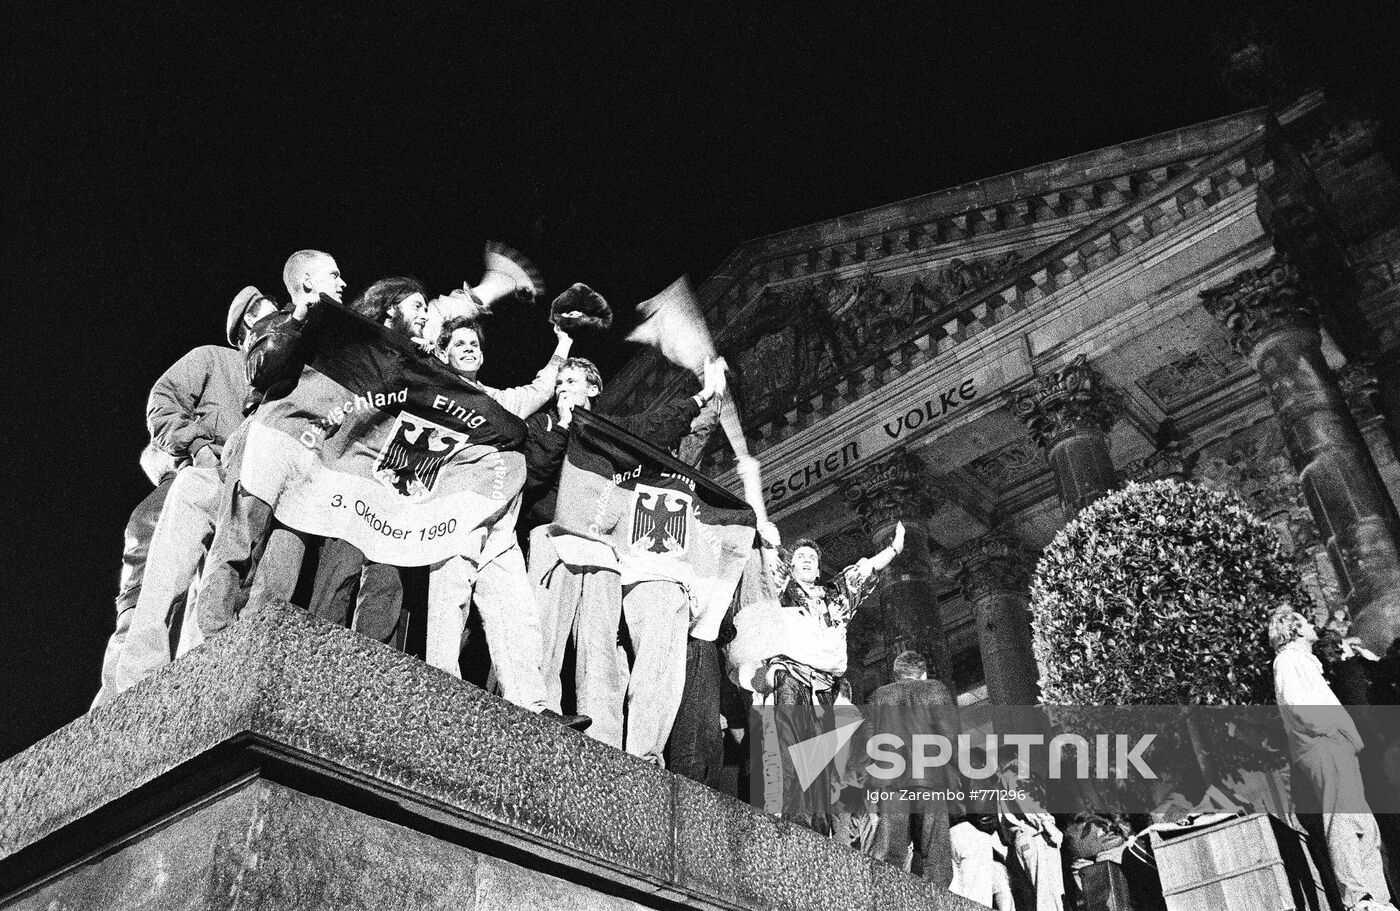 Unification of Germany celebration in Berlin by Reichstag